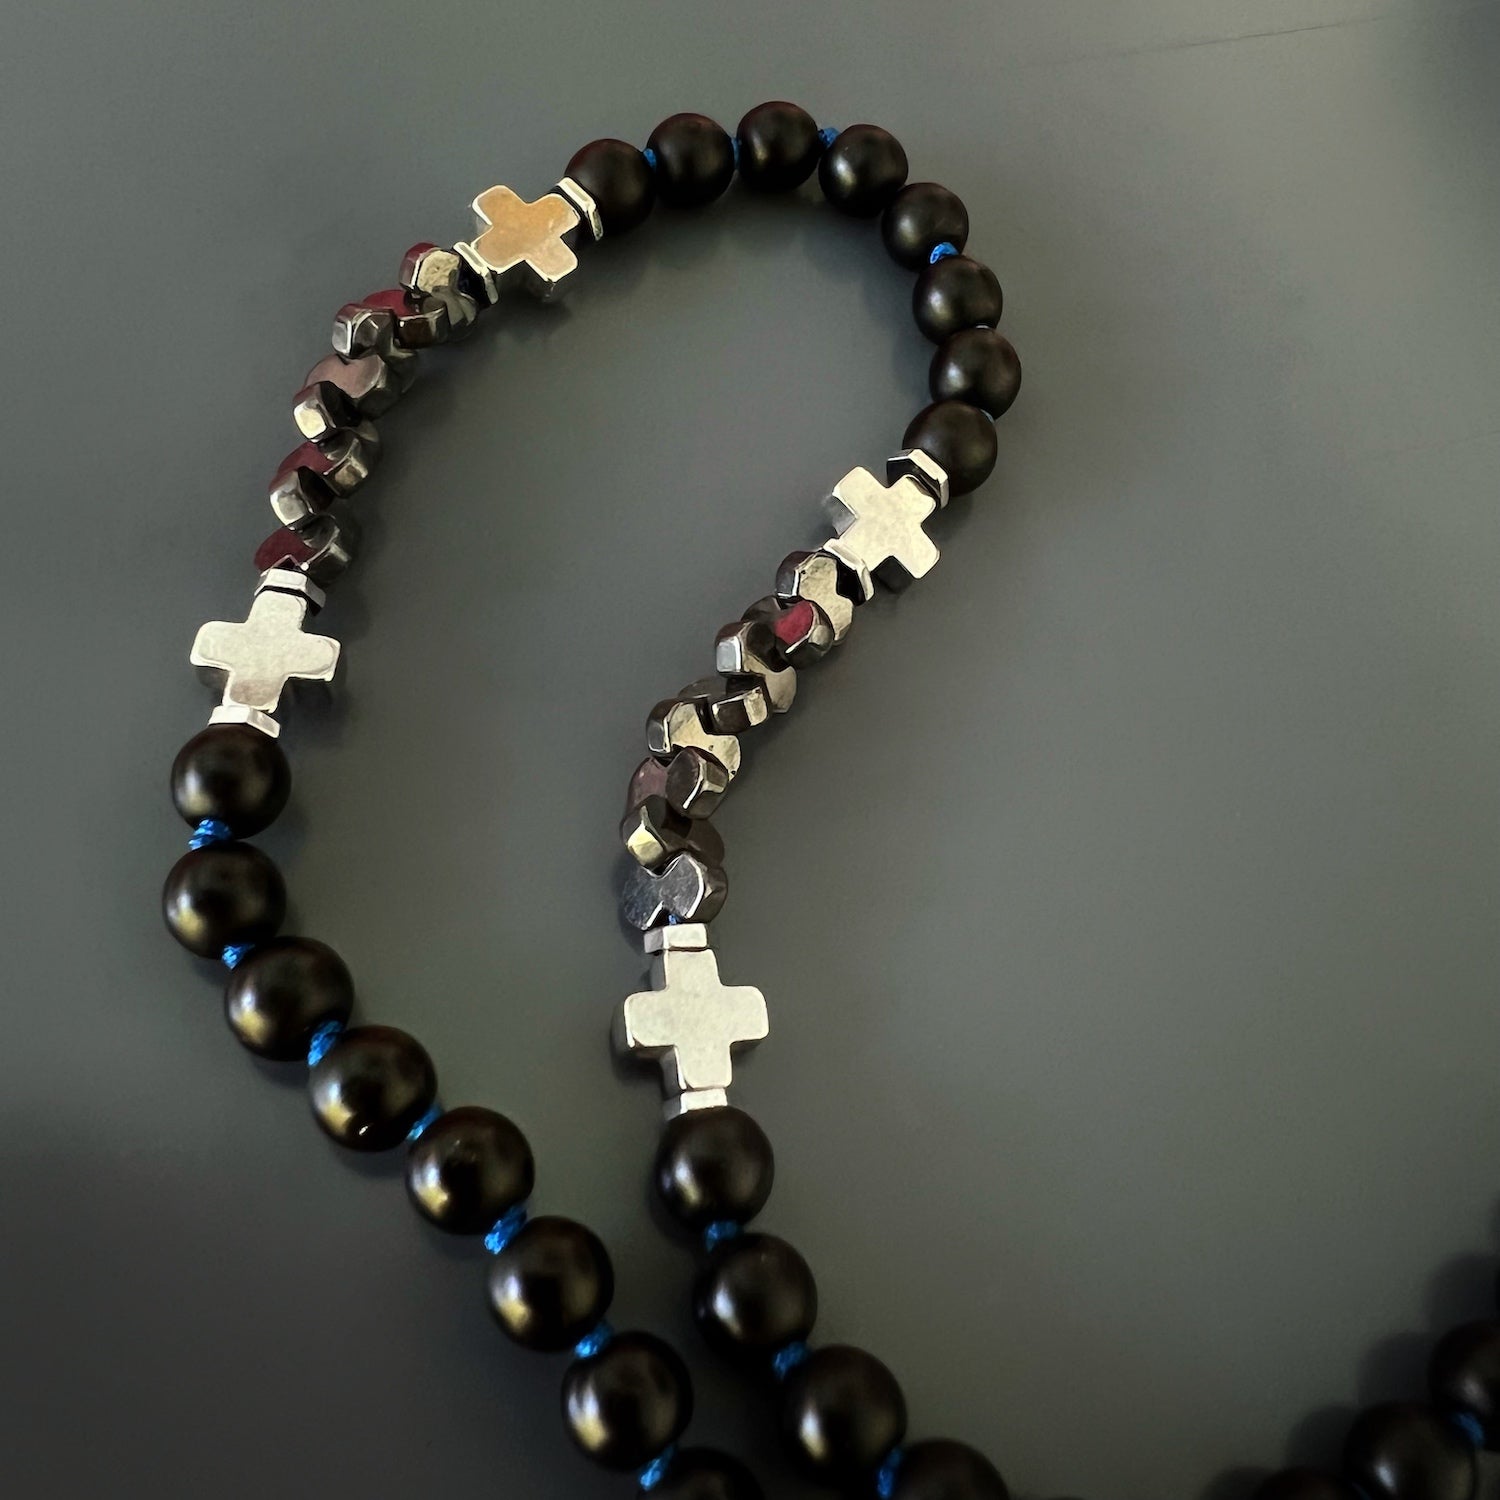 Stylish Necklace with Black Onyx and Silver Accents